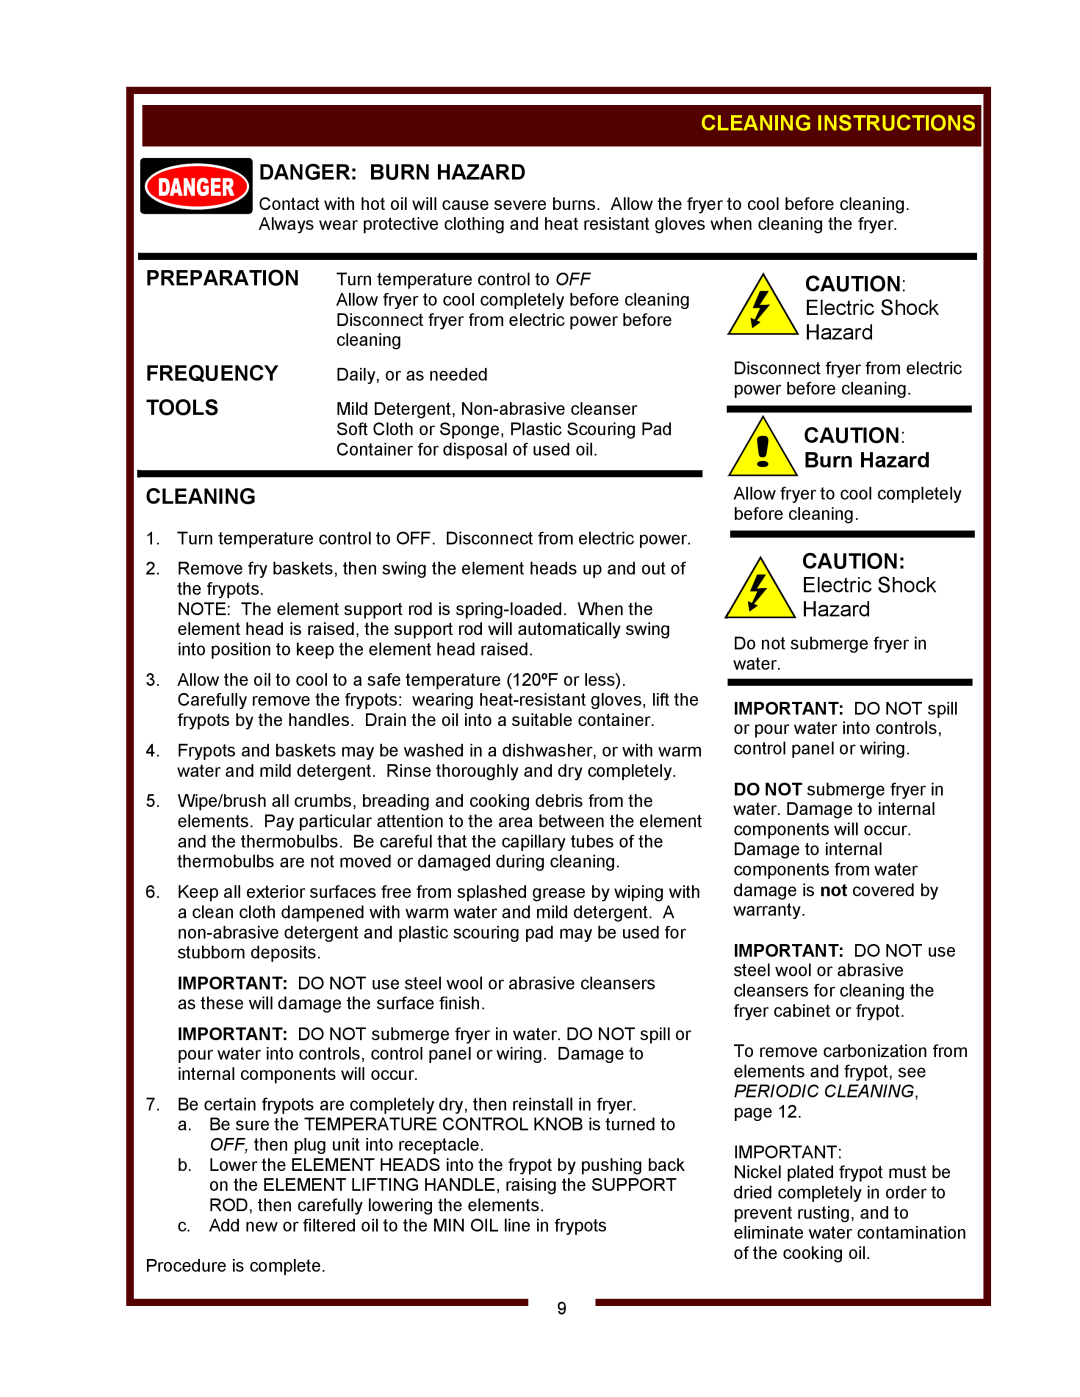 Wells F-886 Cleaning Instructions, Preparation, Frequency, Tools, Danger Burn Hazard, PERIODIC CLEANING, page 